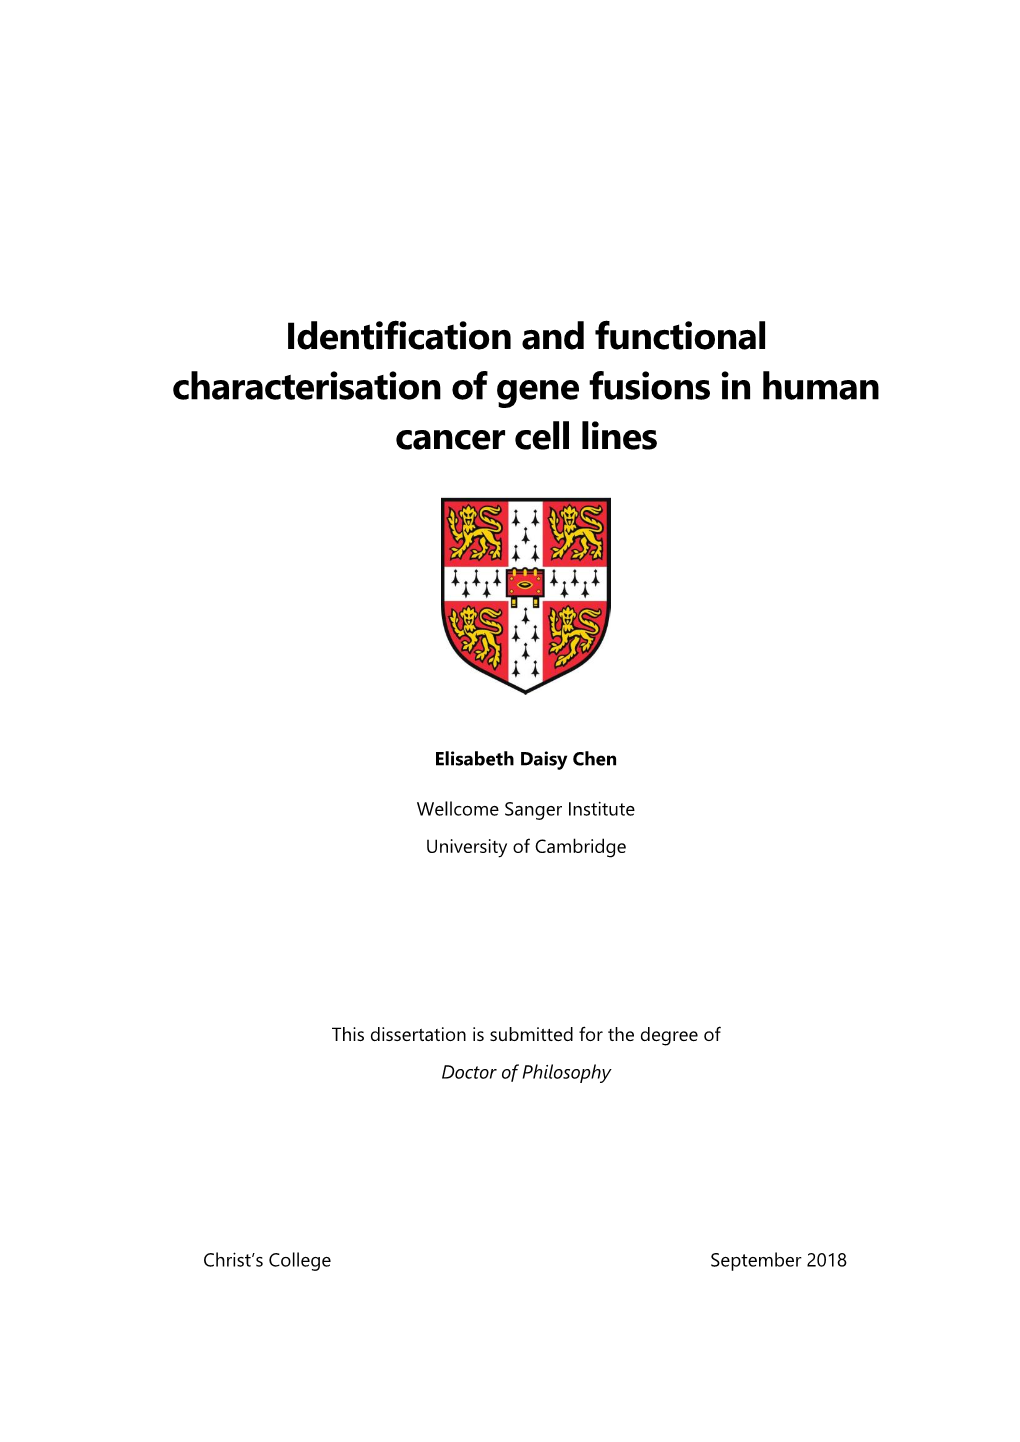 Identification and Functional Characterisation of Gene Fusions in Human Cancer Cell Lines